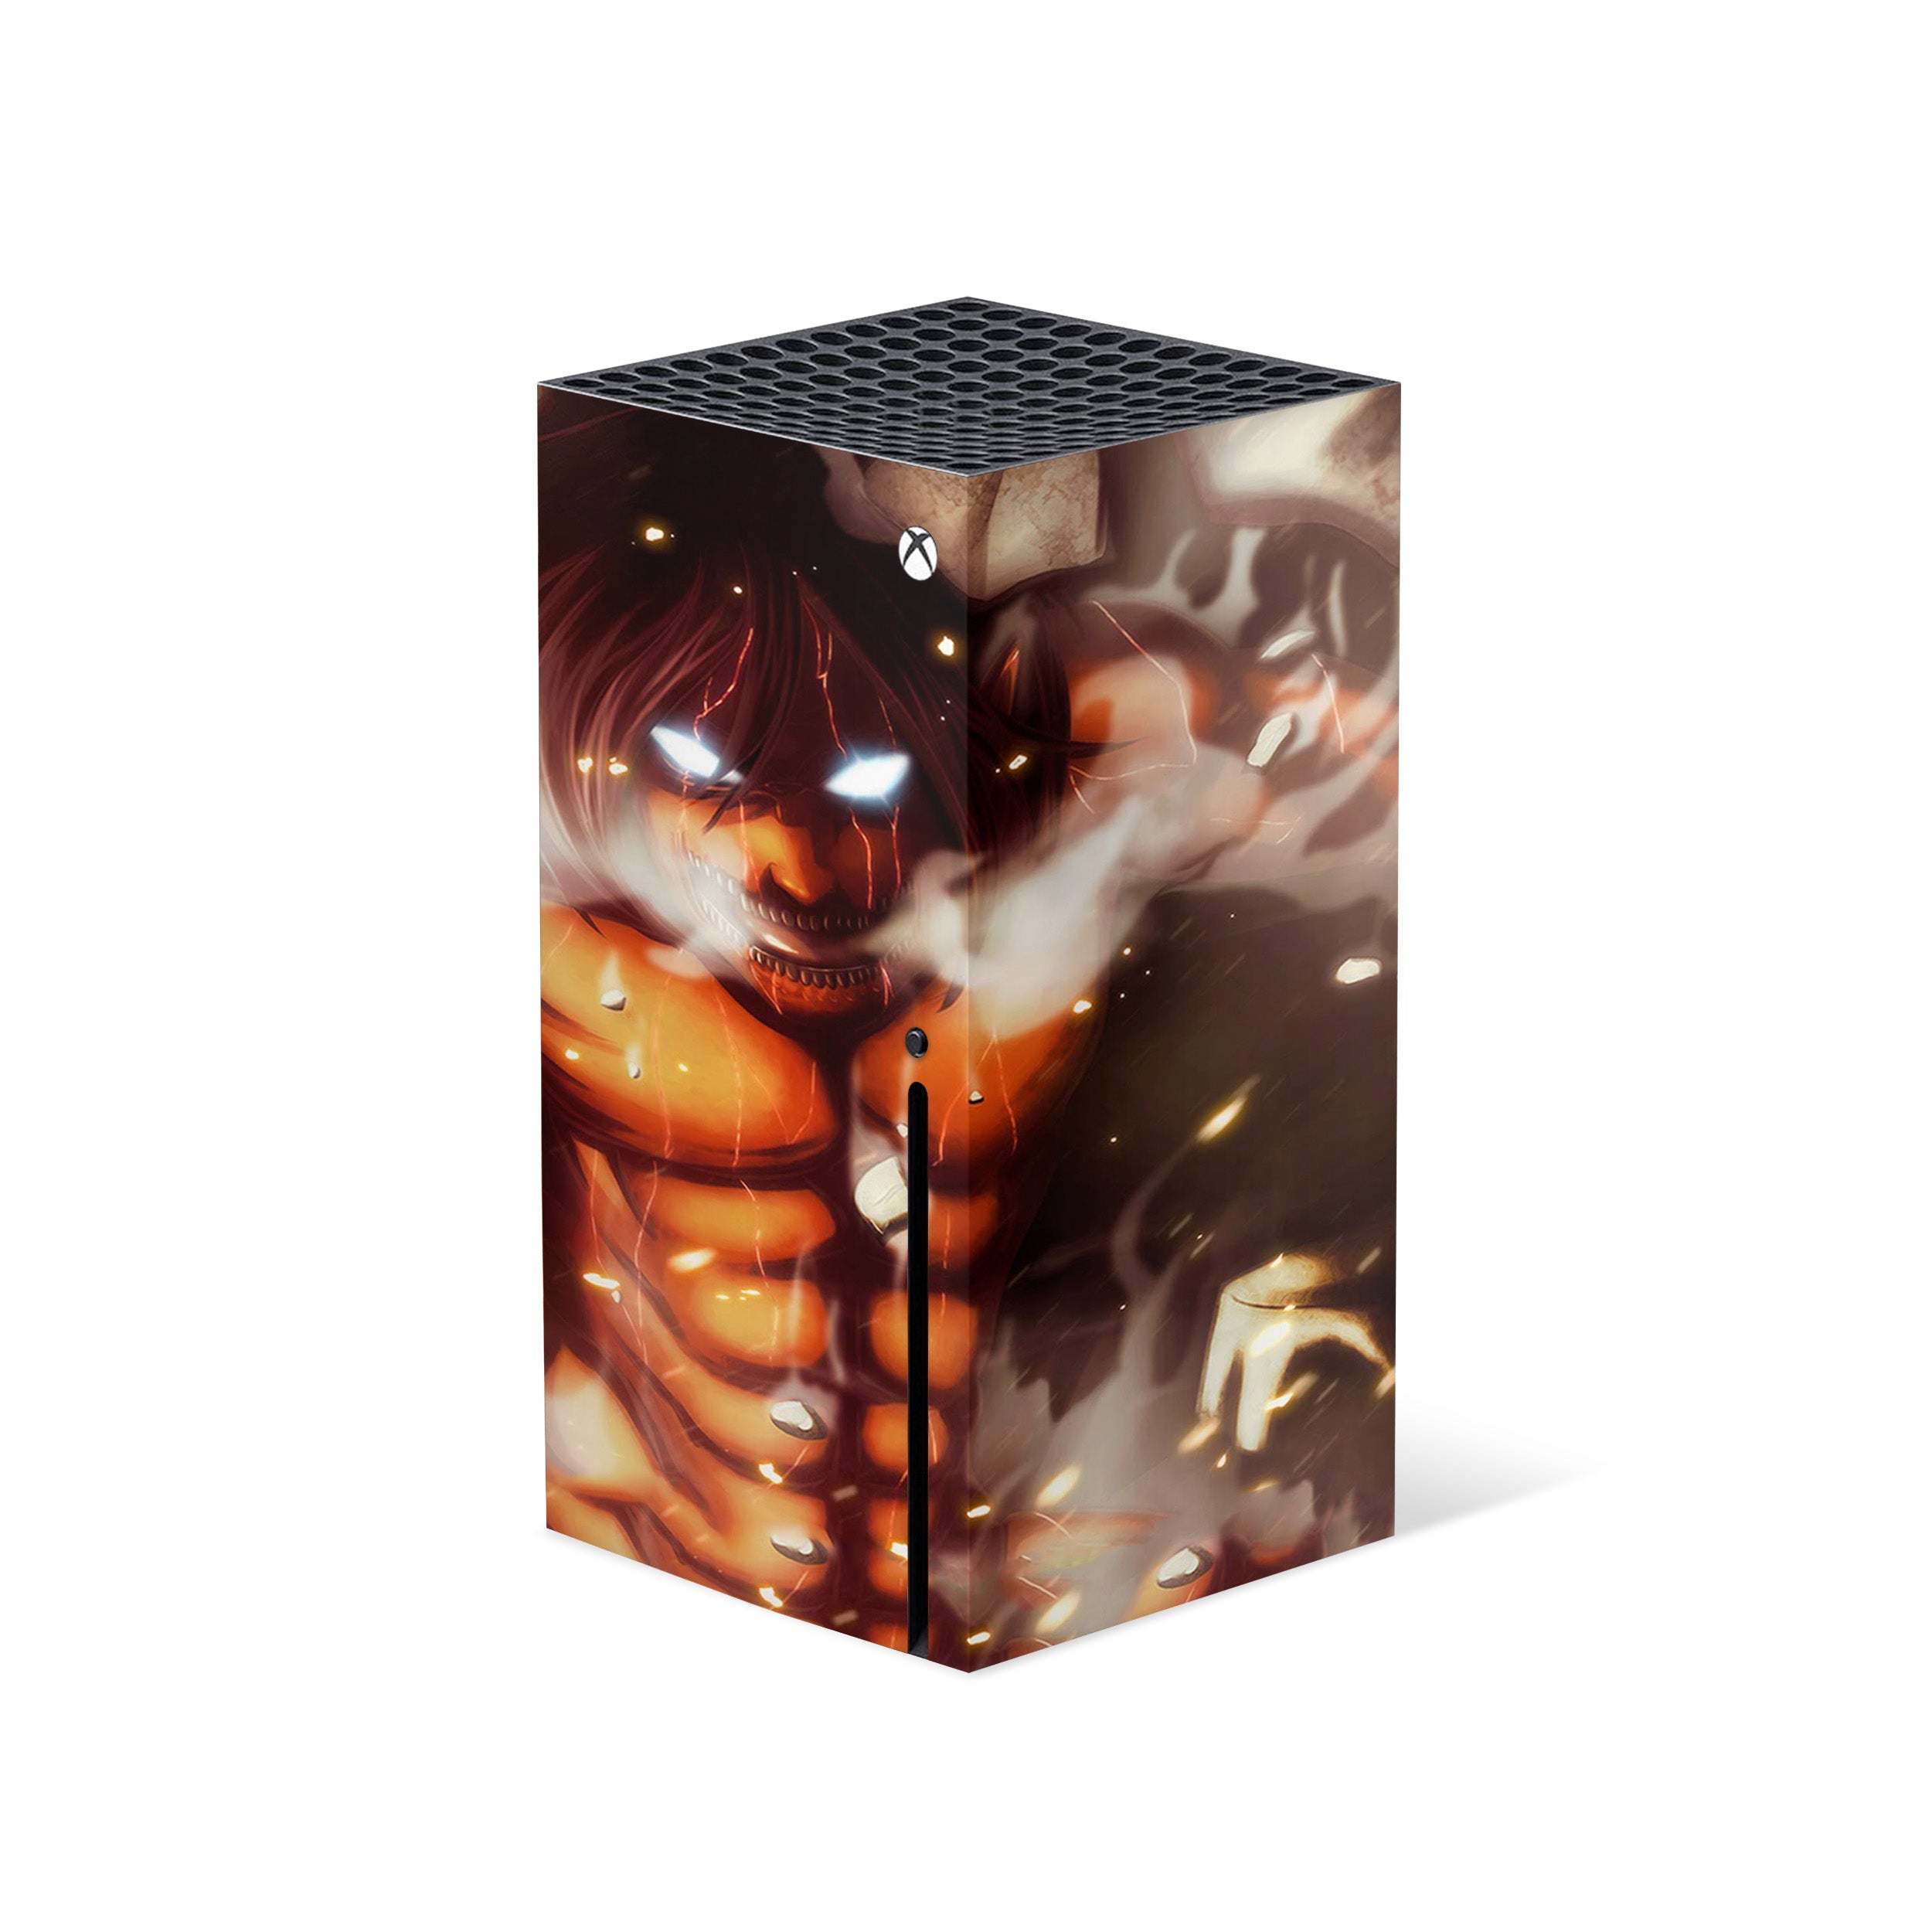 A video game skin featuring a Attack On Titan Eren Yeager design for the Xbox Series X.